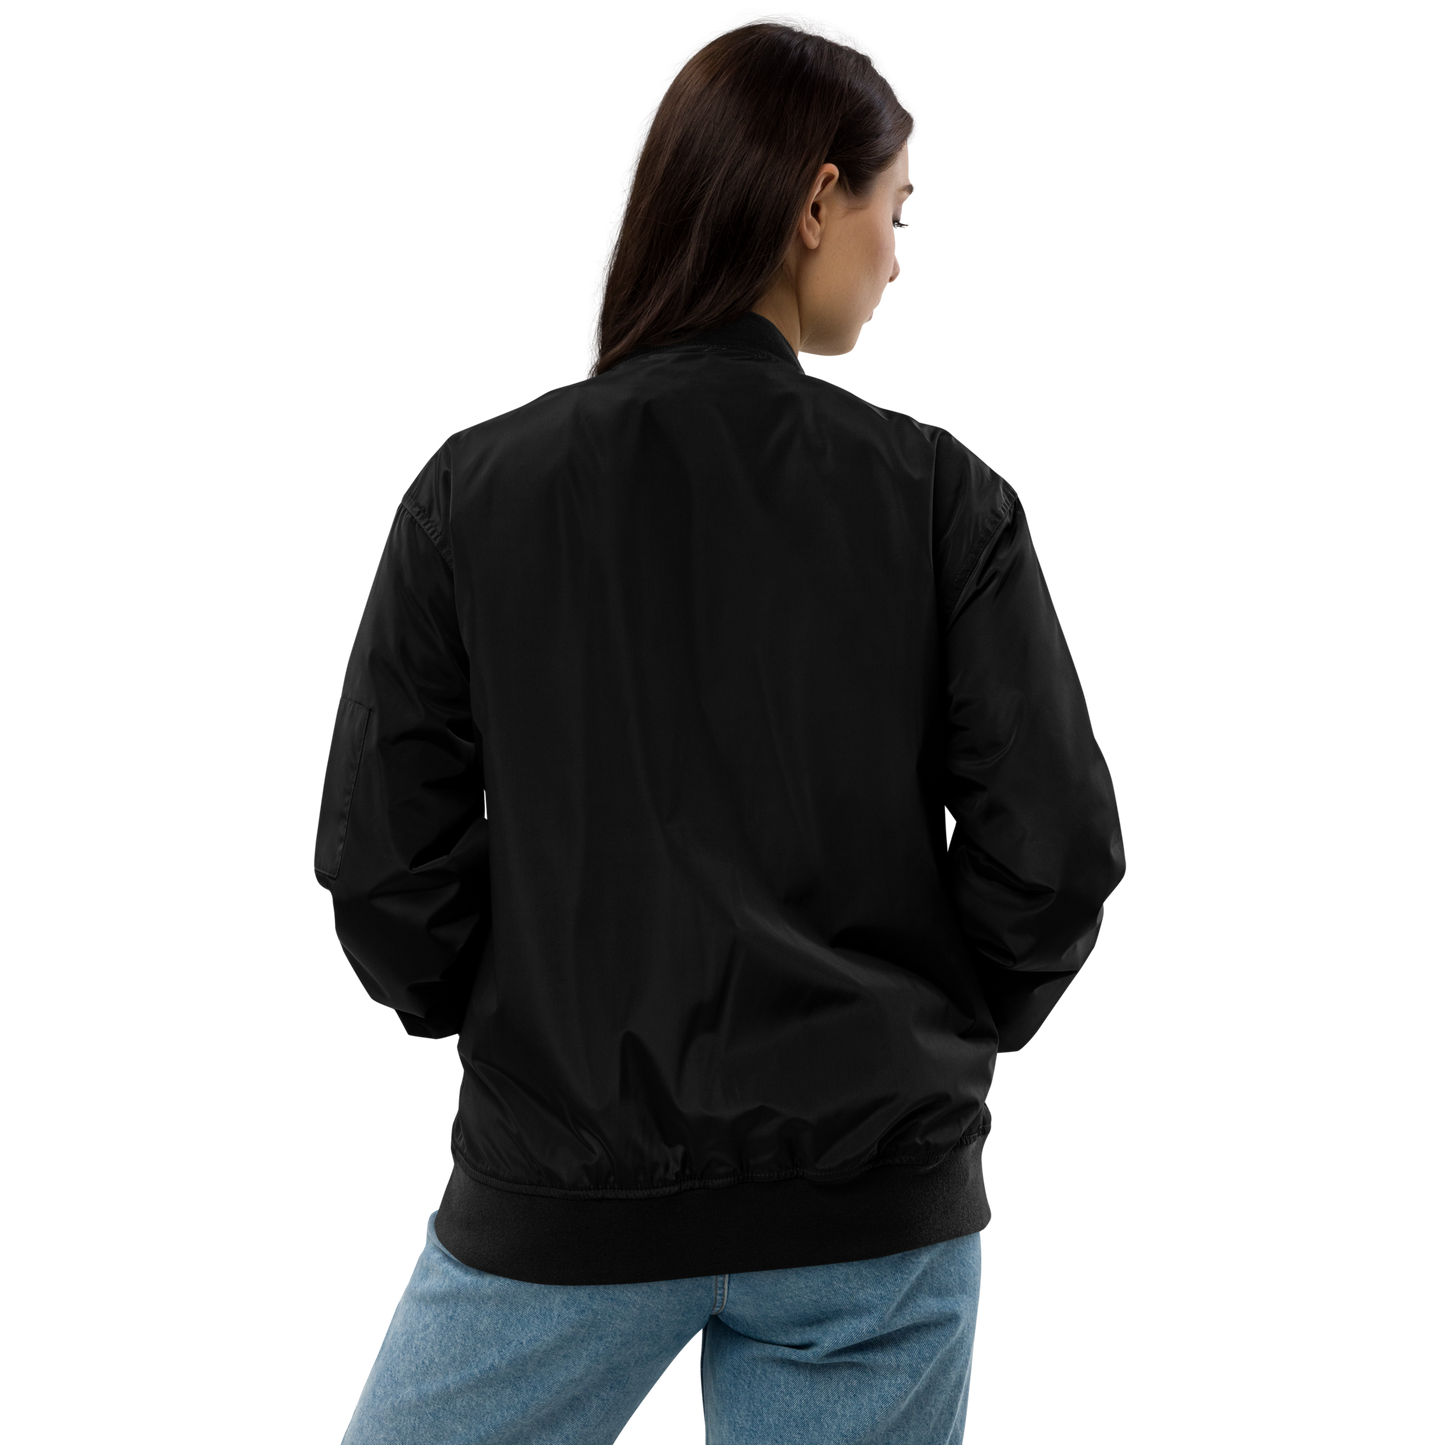 Meicher - Women's Premium Recycled Bomber Jacket